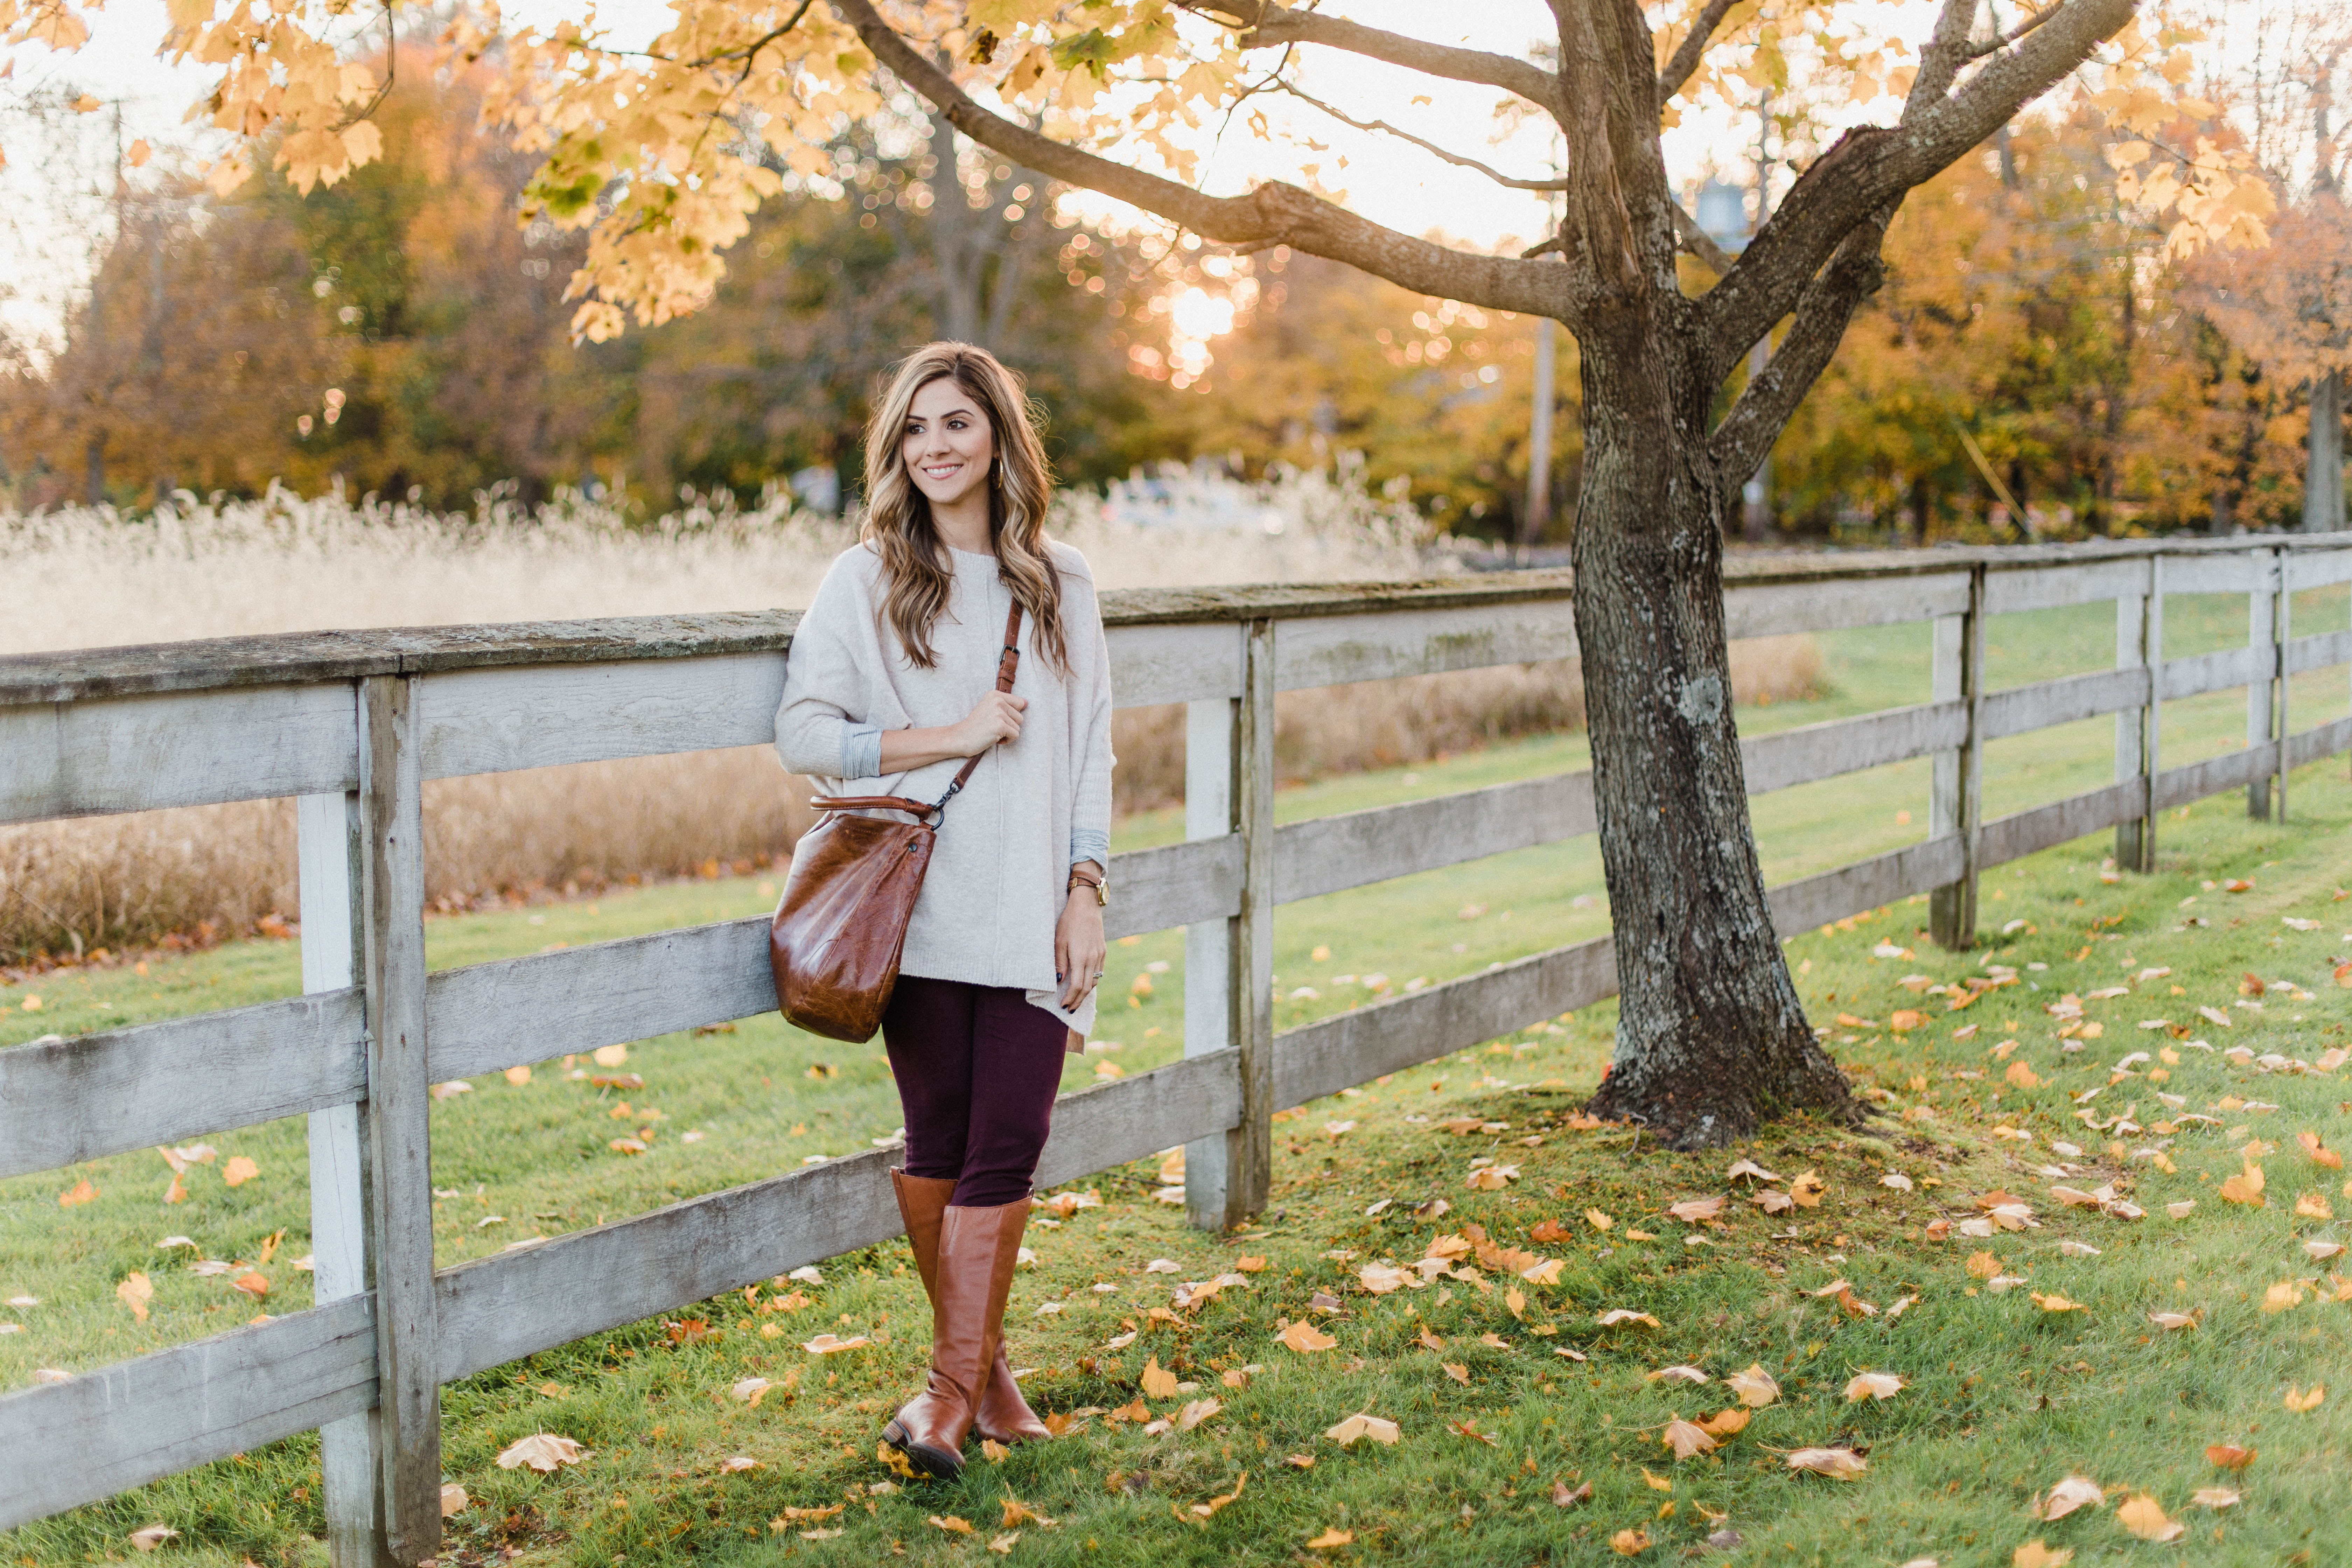 Connecticut life and style blogger Lauren McBride shares How to Style Colored Pants, and one important tip that is fool-proof for any outfit. 